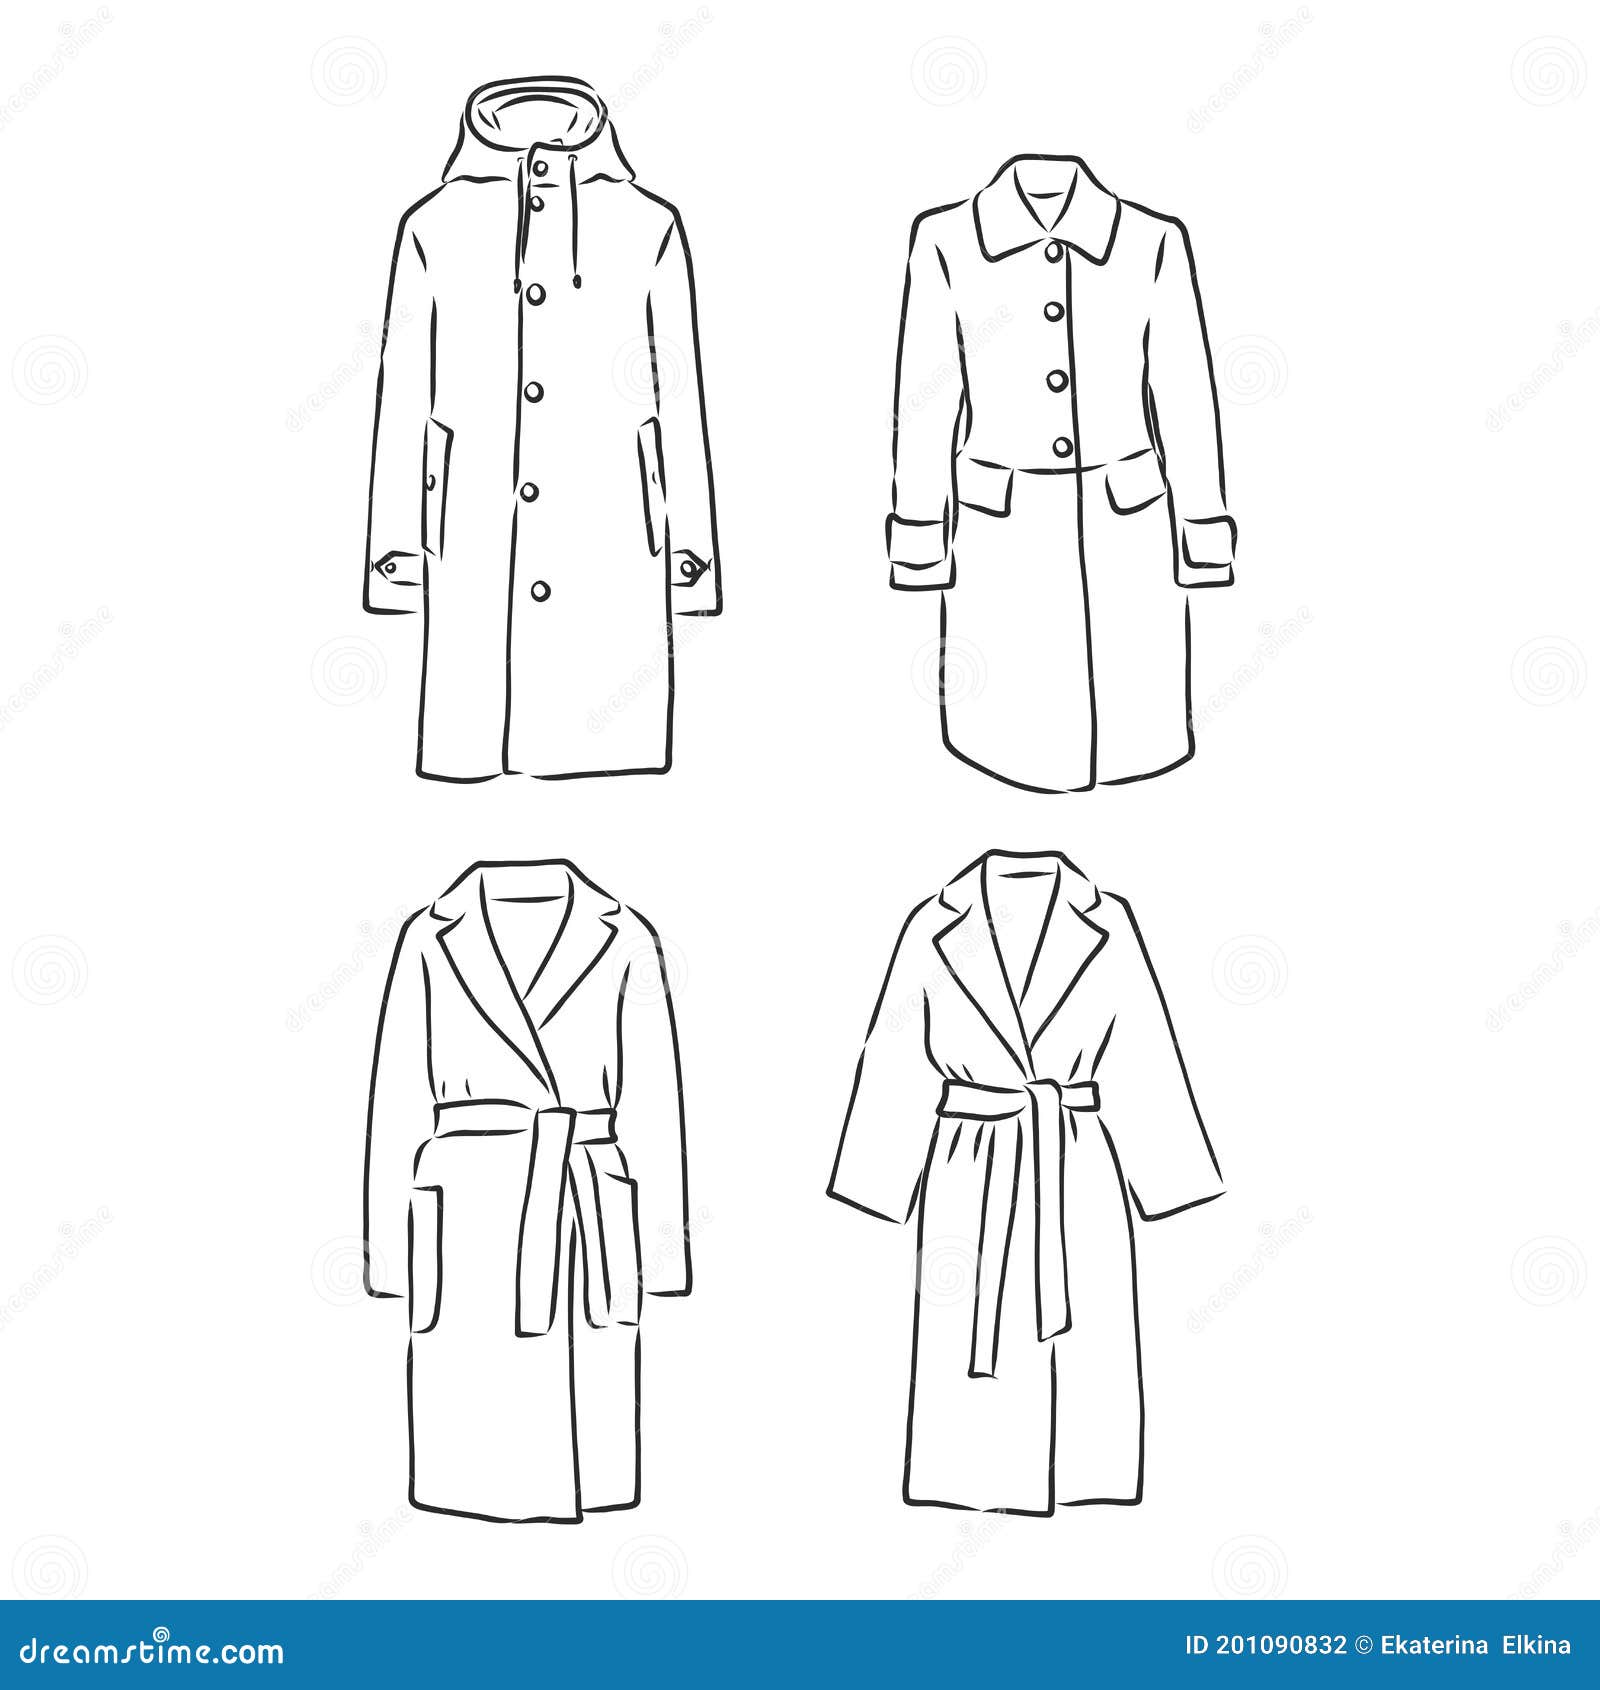 How to Draw a Jacket Step by Step - EasyLineDrawing